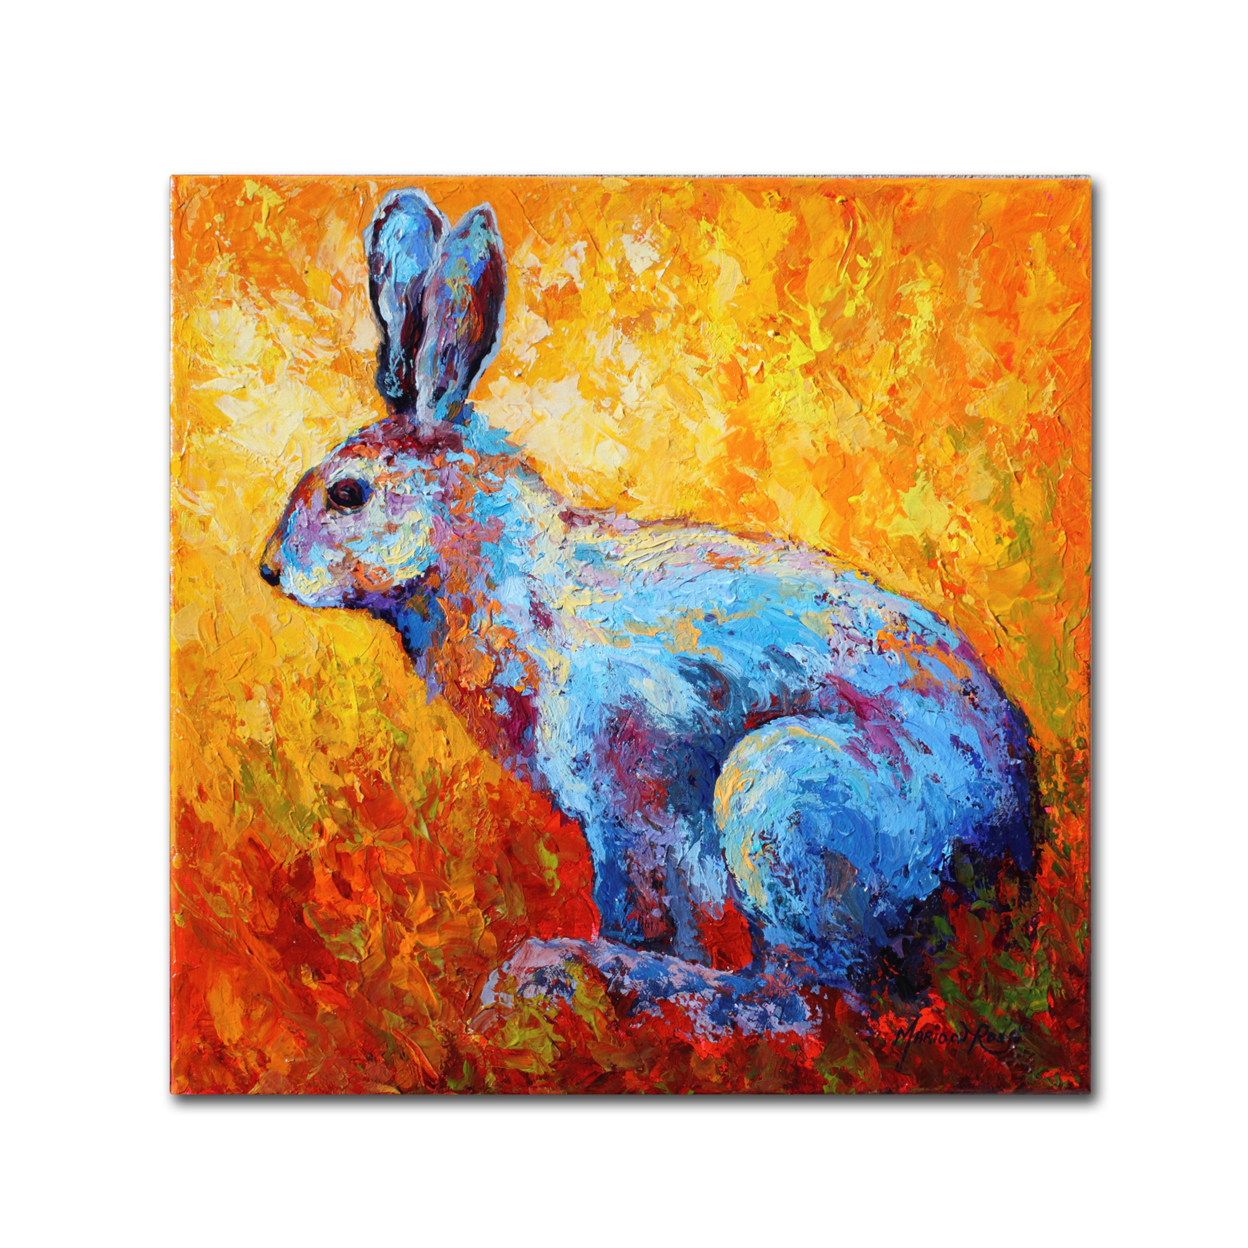 Marion Rose 'Bunnie (krabbit)' Ready To Hang Canvas Art 14 X 14 Inches Made In USA